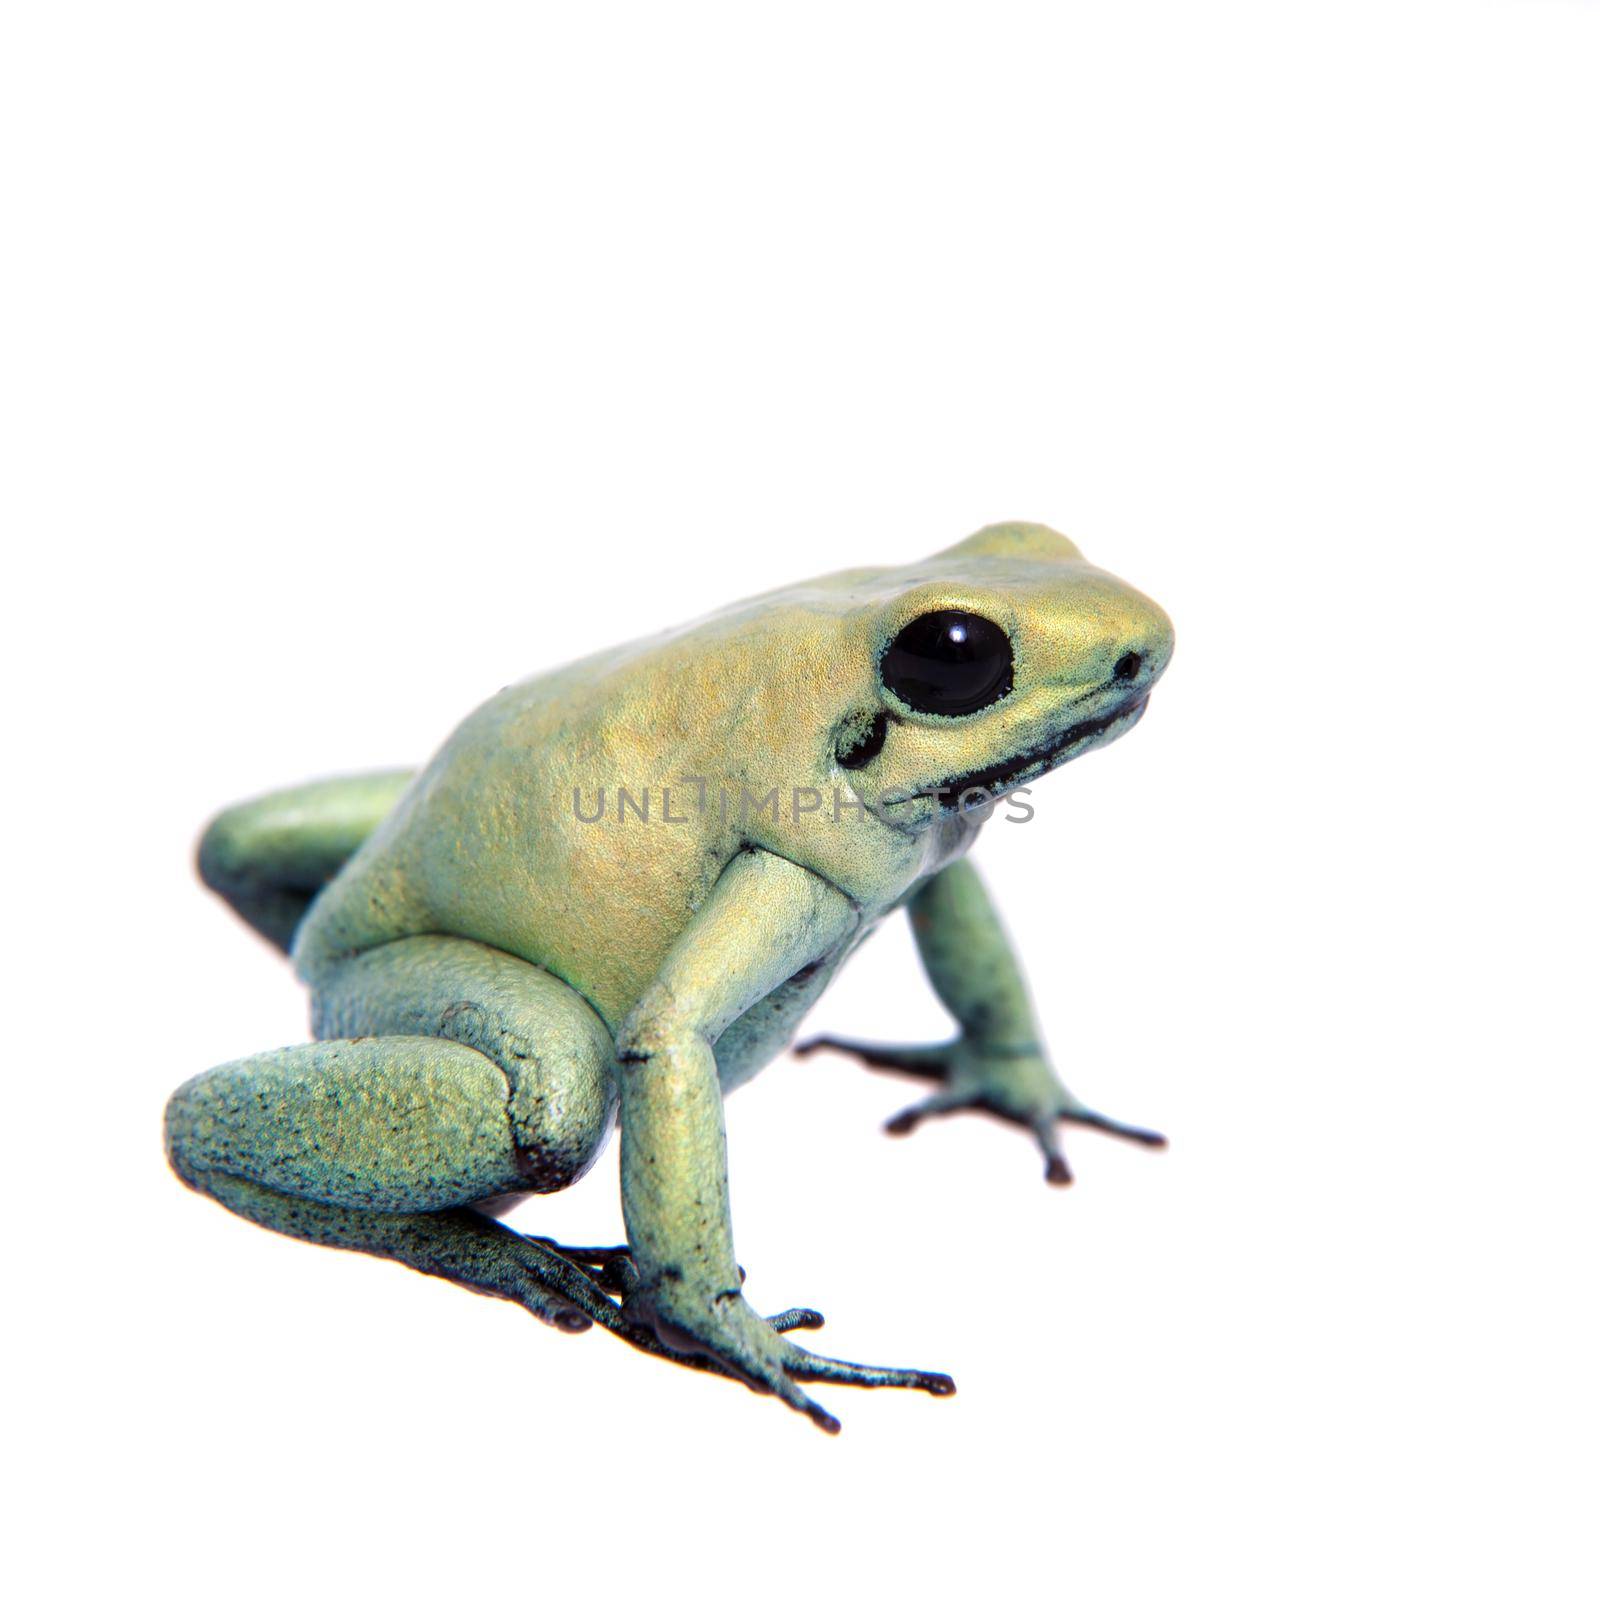 Mint golden poison frog on white background by RosaJay